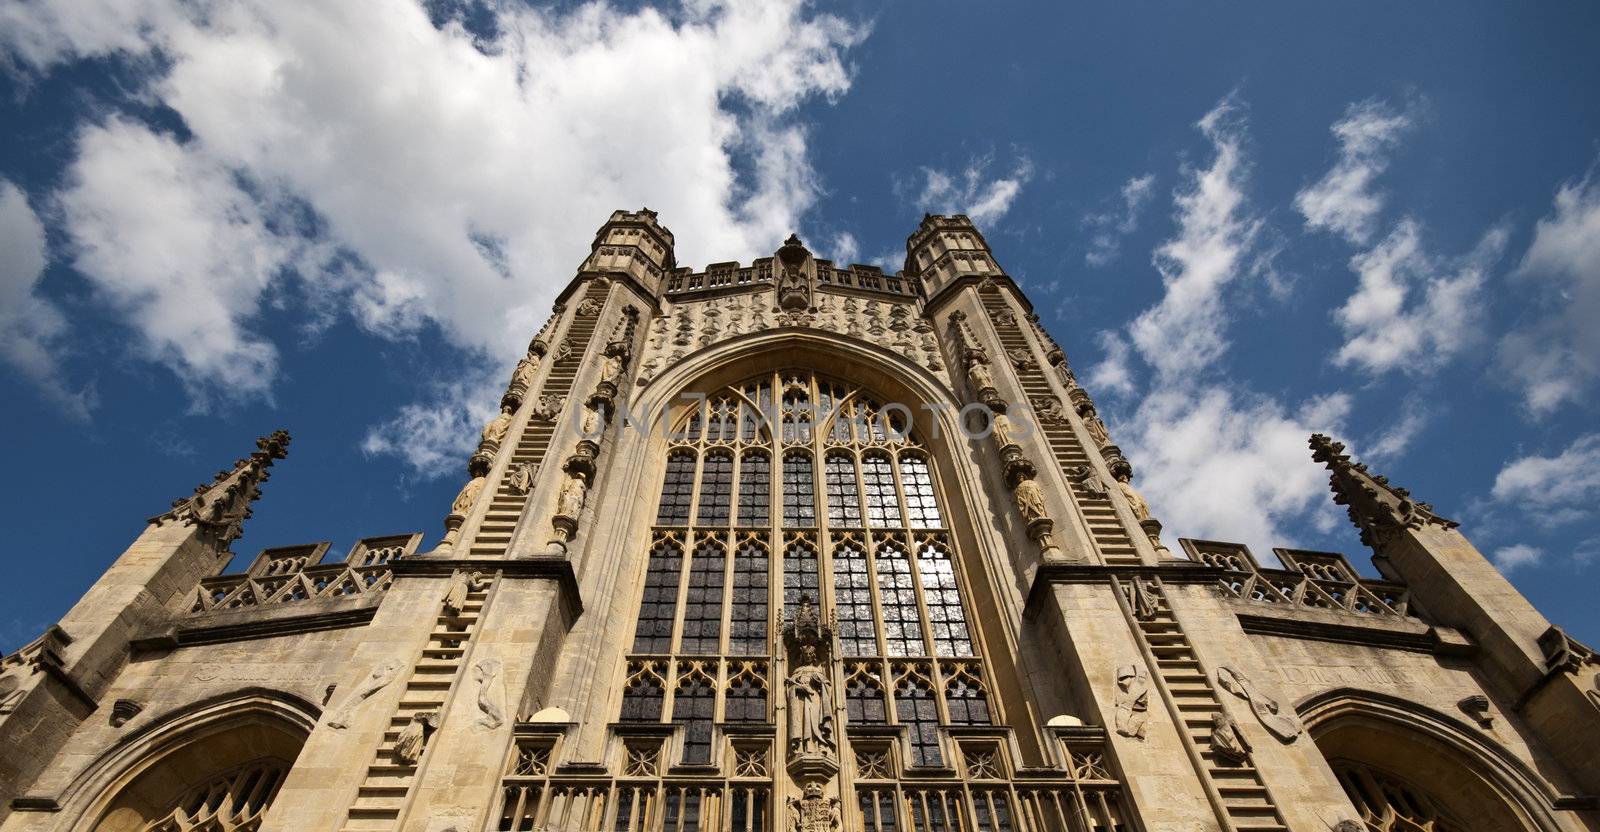 Bath abbey with blue sky and clouds above